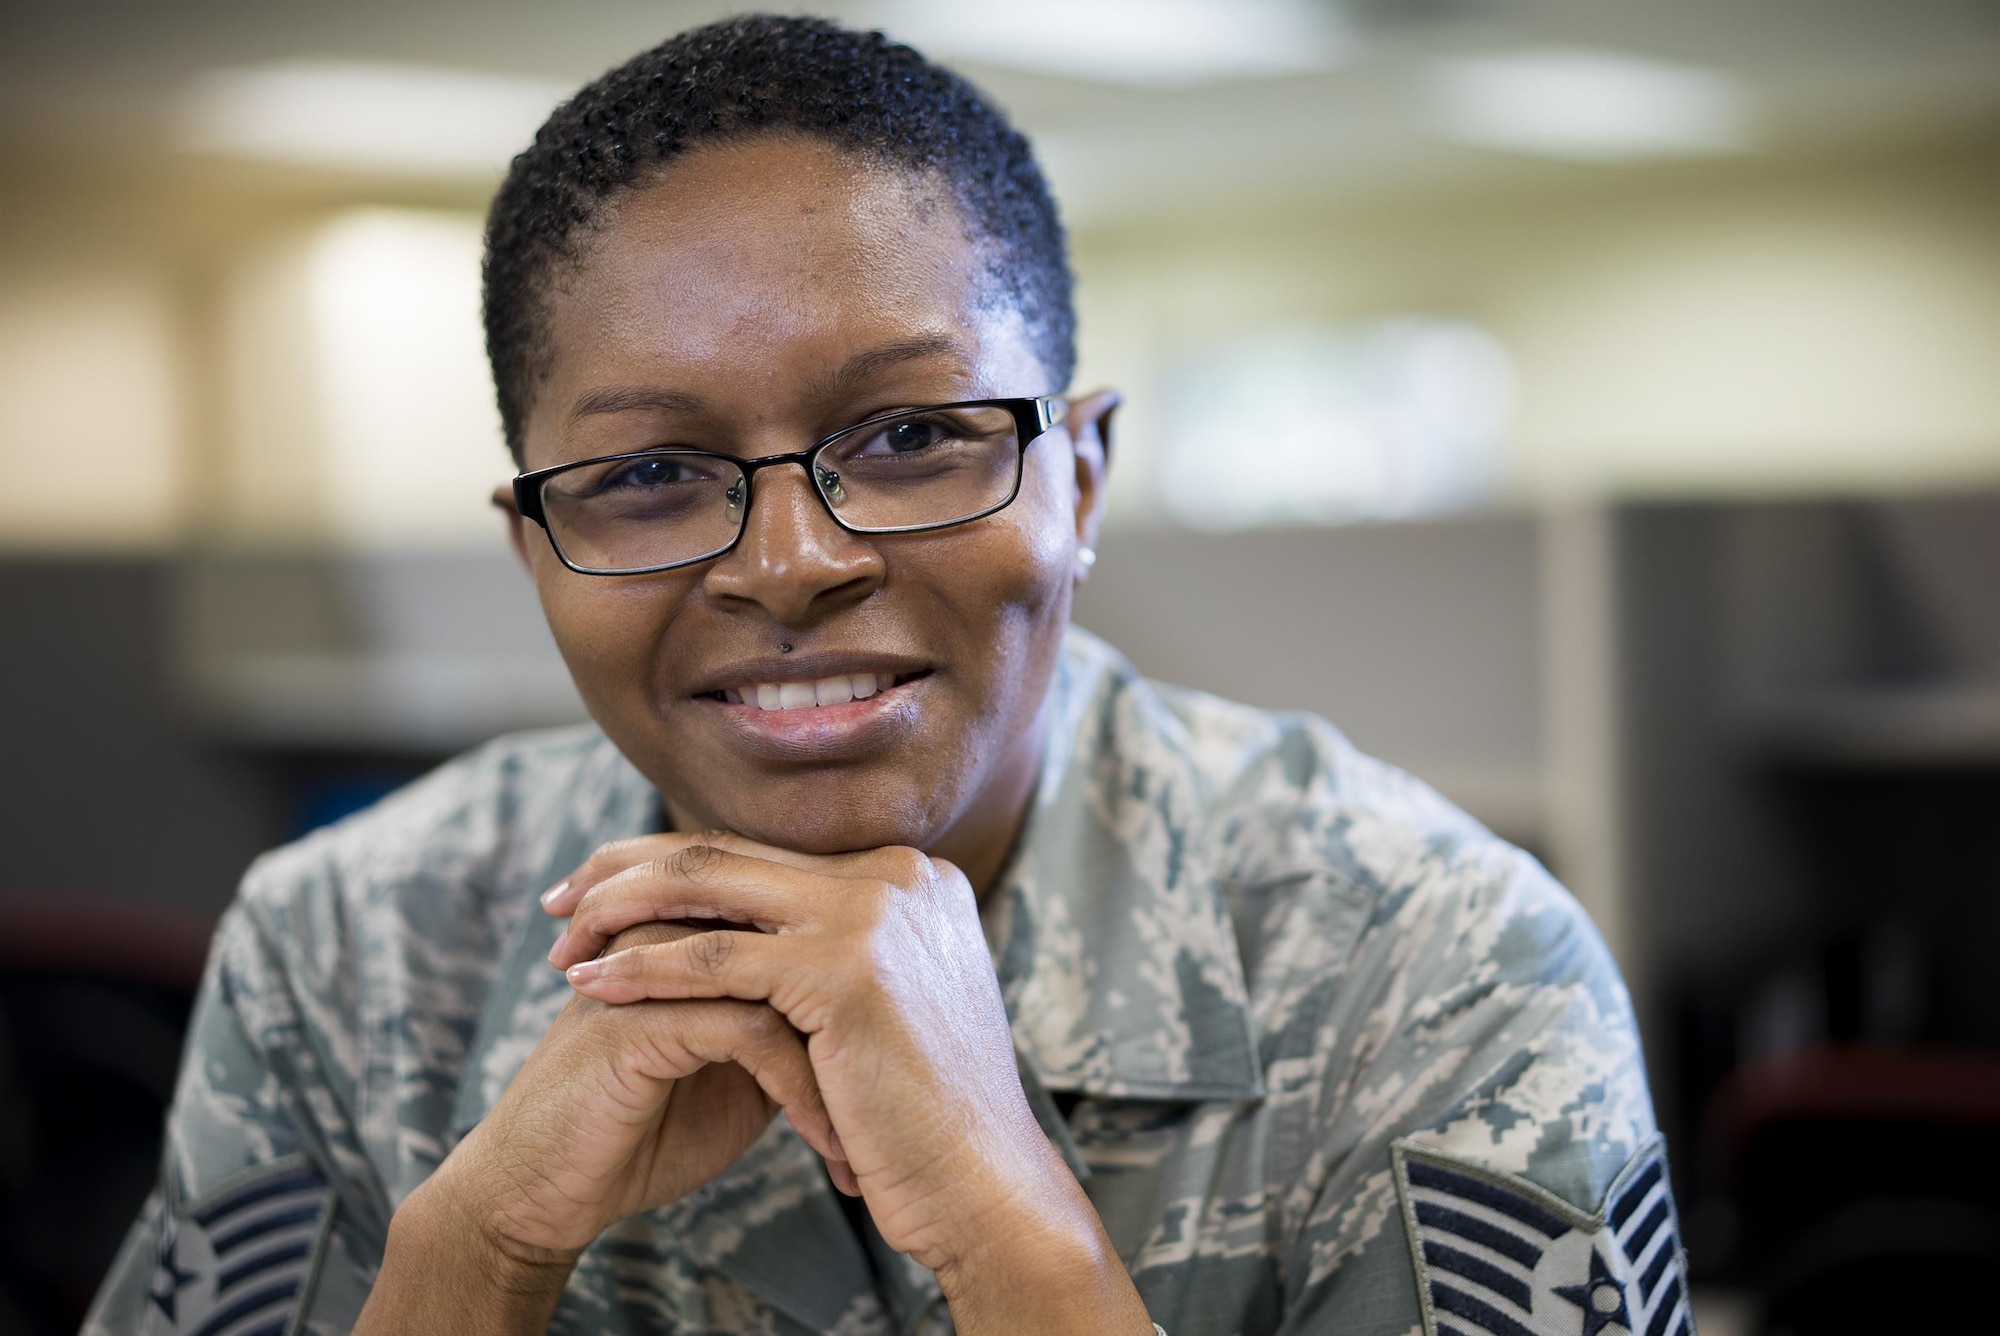 Tech. Sgt. Chanika Walters, 413th Aeromedical Staging Squadron command support staff NCO in charge, poses for a portrait April 25, 2017, at Robins Air Force Base, Georgia. Walters served in the U.S. Army for nine years before joining the Air Force Reserve in 2005. (U.S. Air Force photo by Jamal D. Sutter)